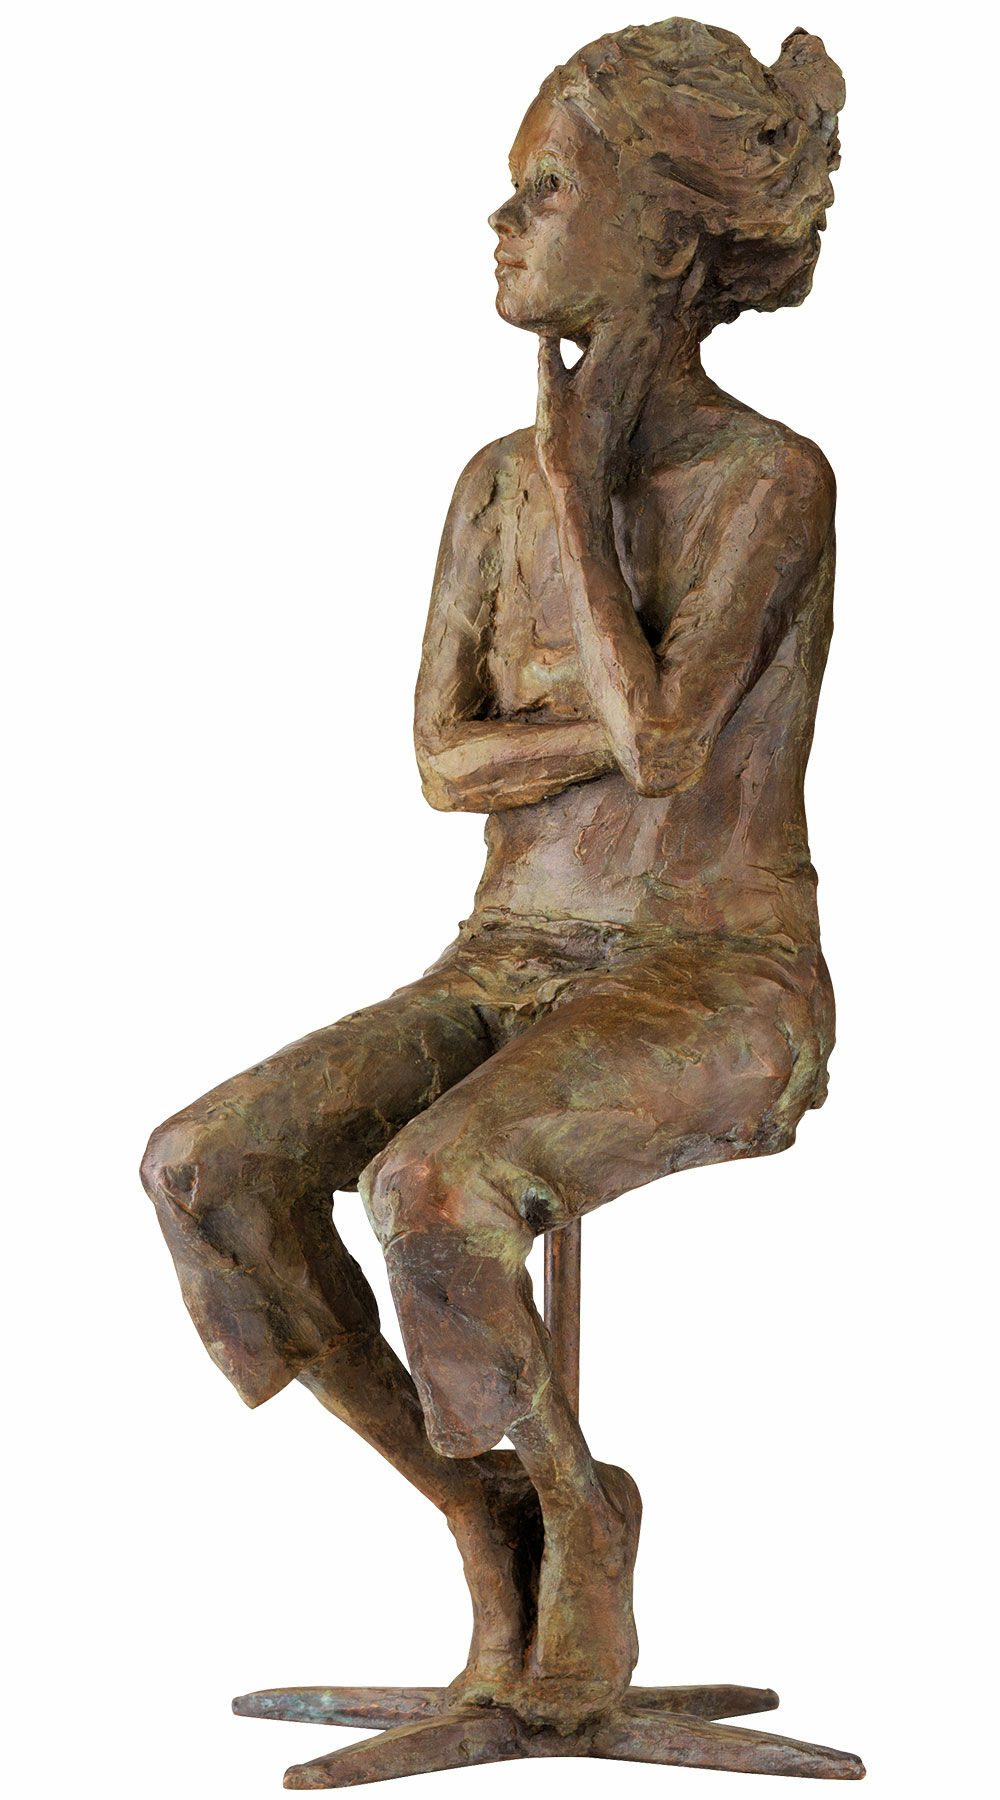 Sculpture "What If", bronze by Valerie Otte